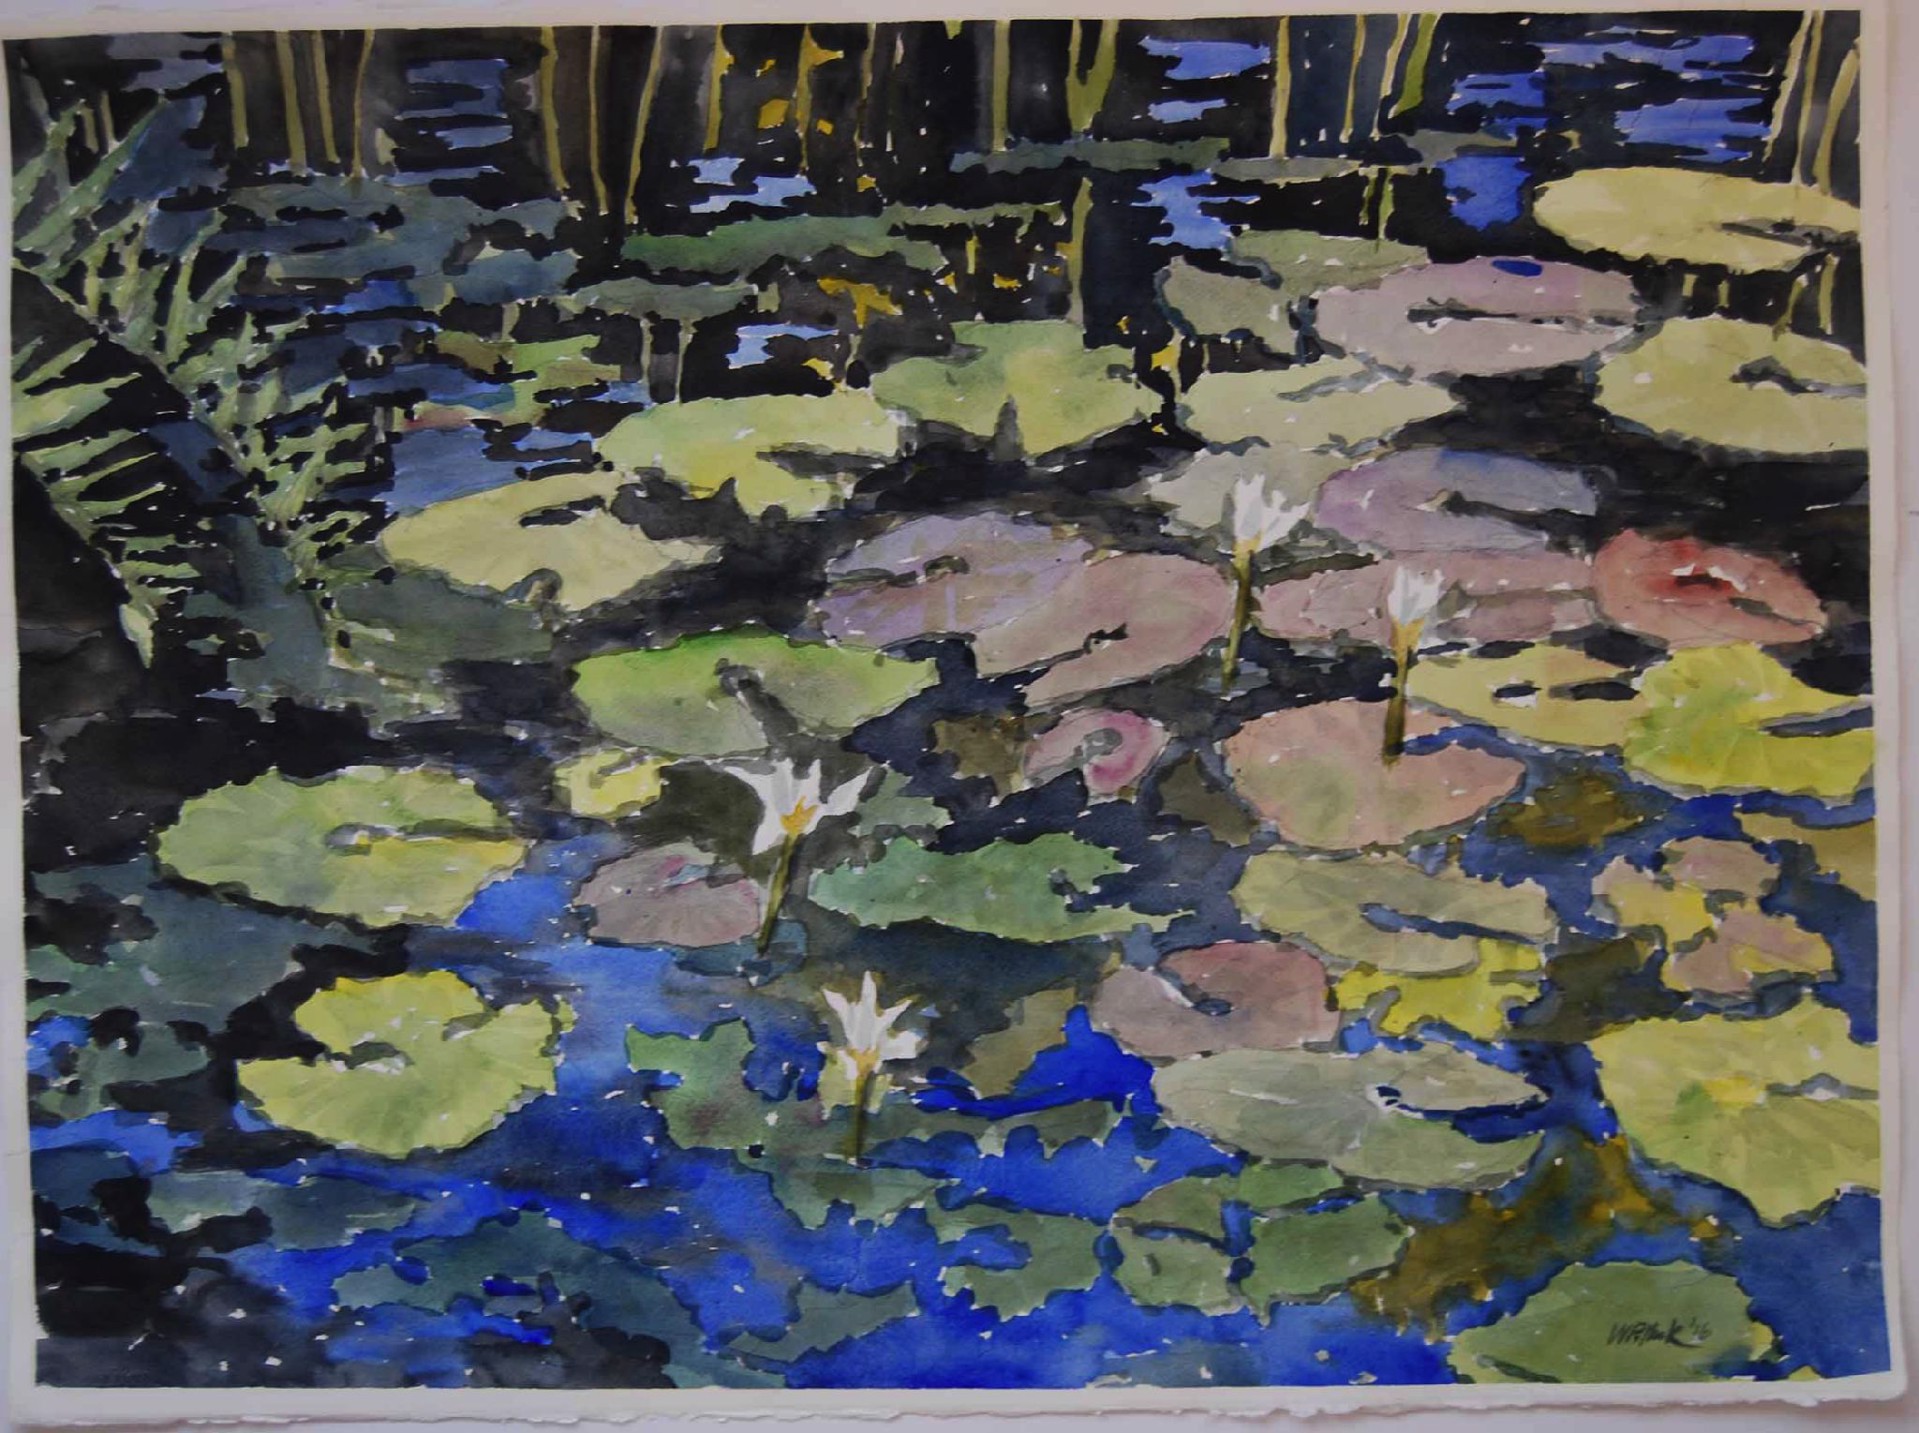 Water Lilies 1 by Wilson Pollock